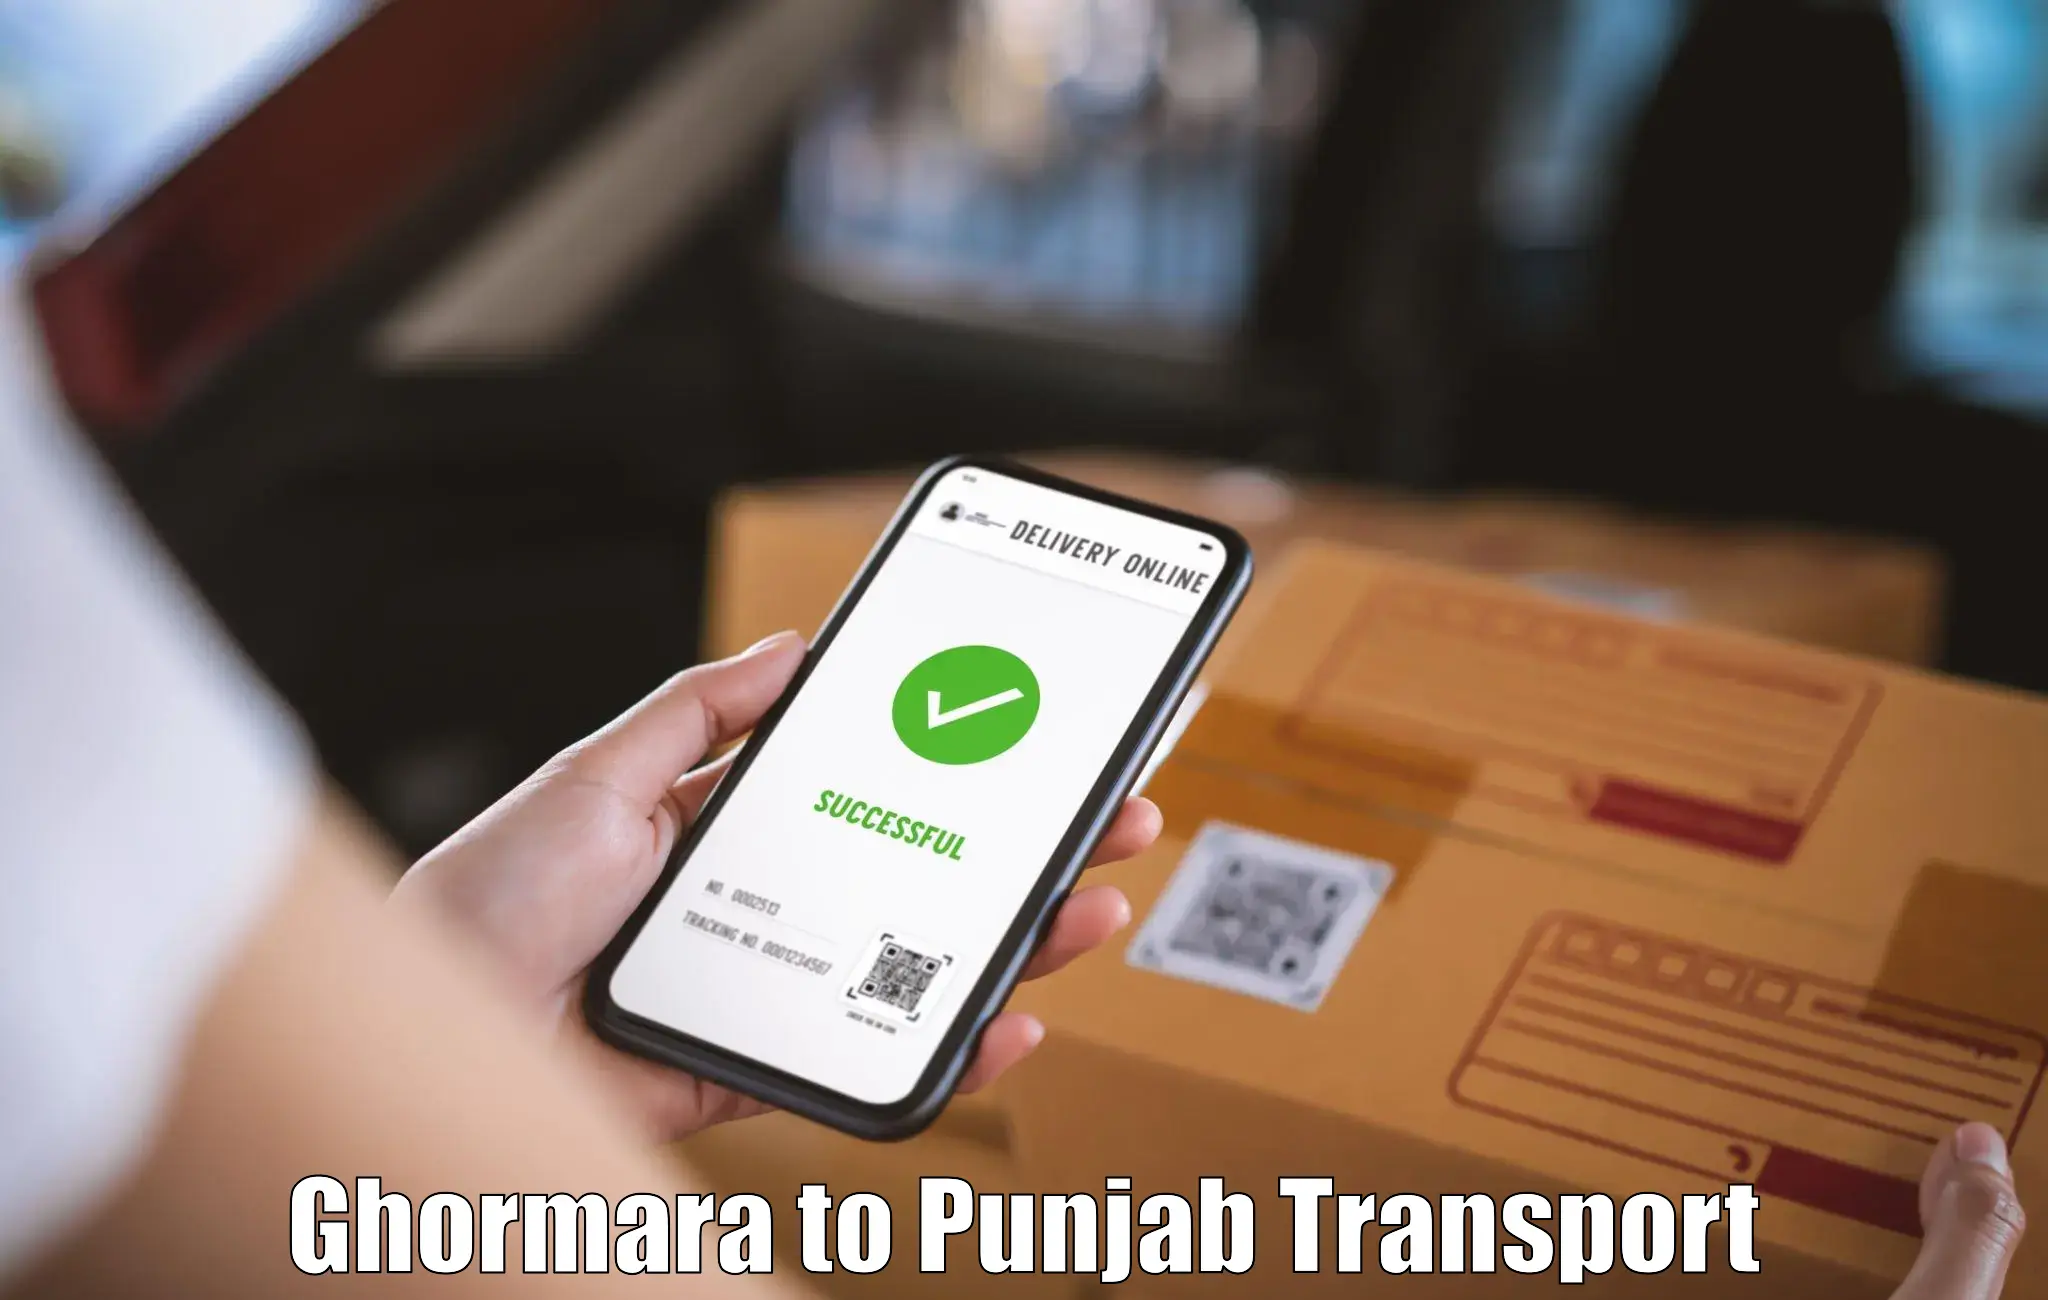 Container transportation services Ghormara to Zirakpur